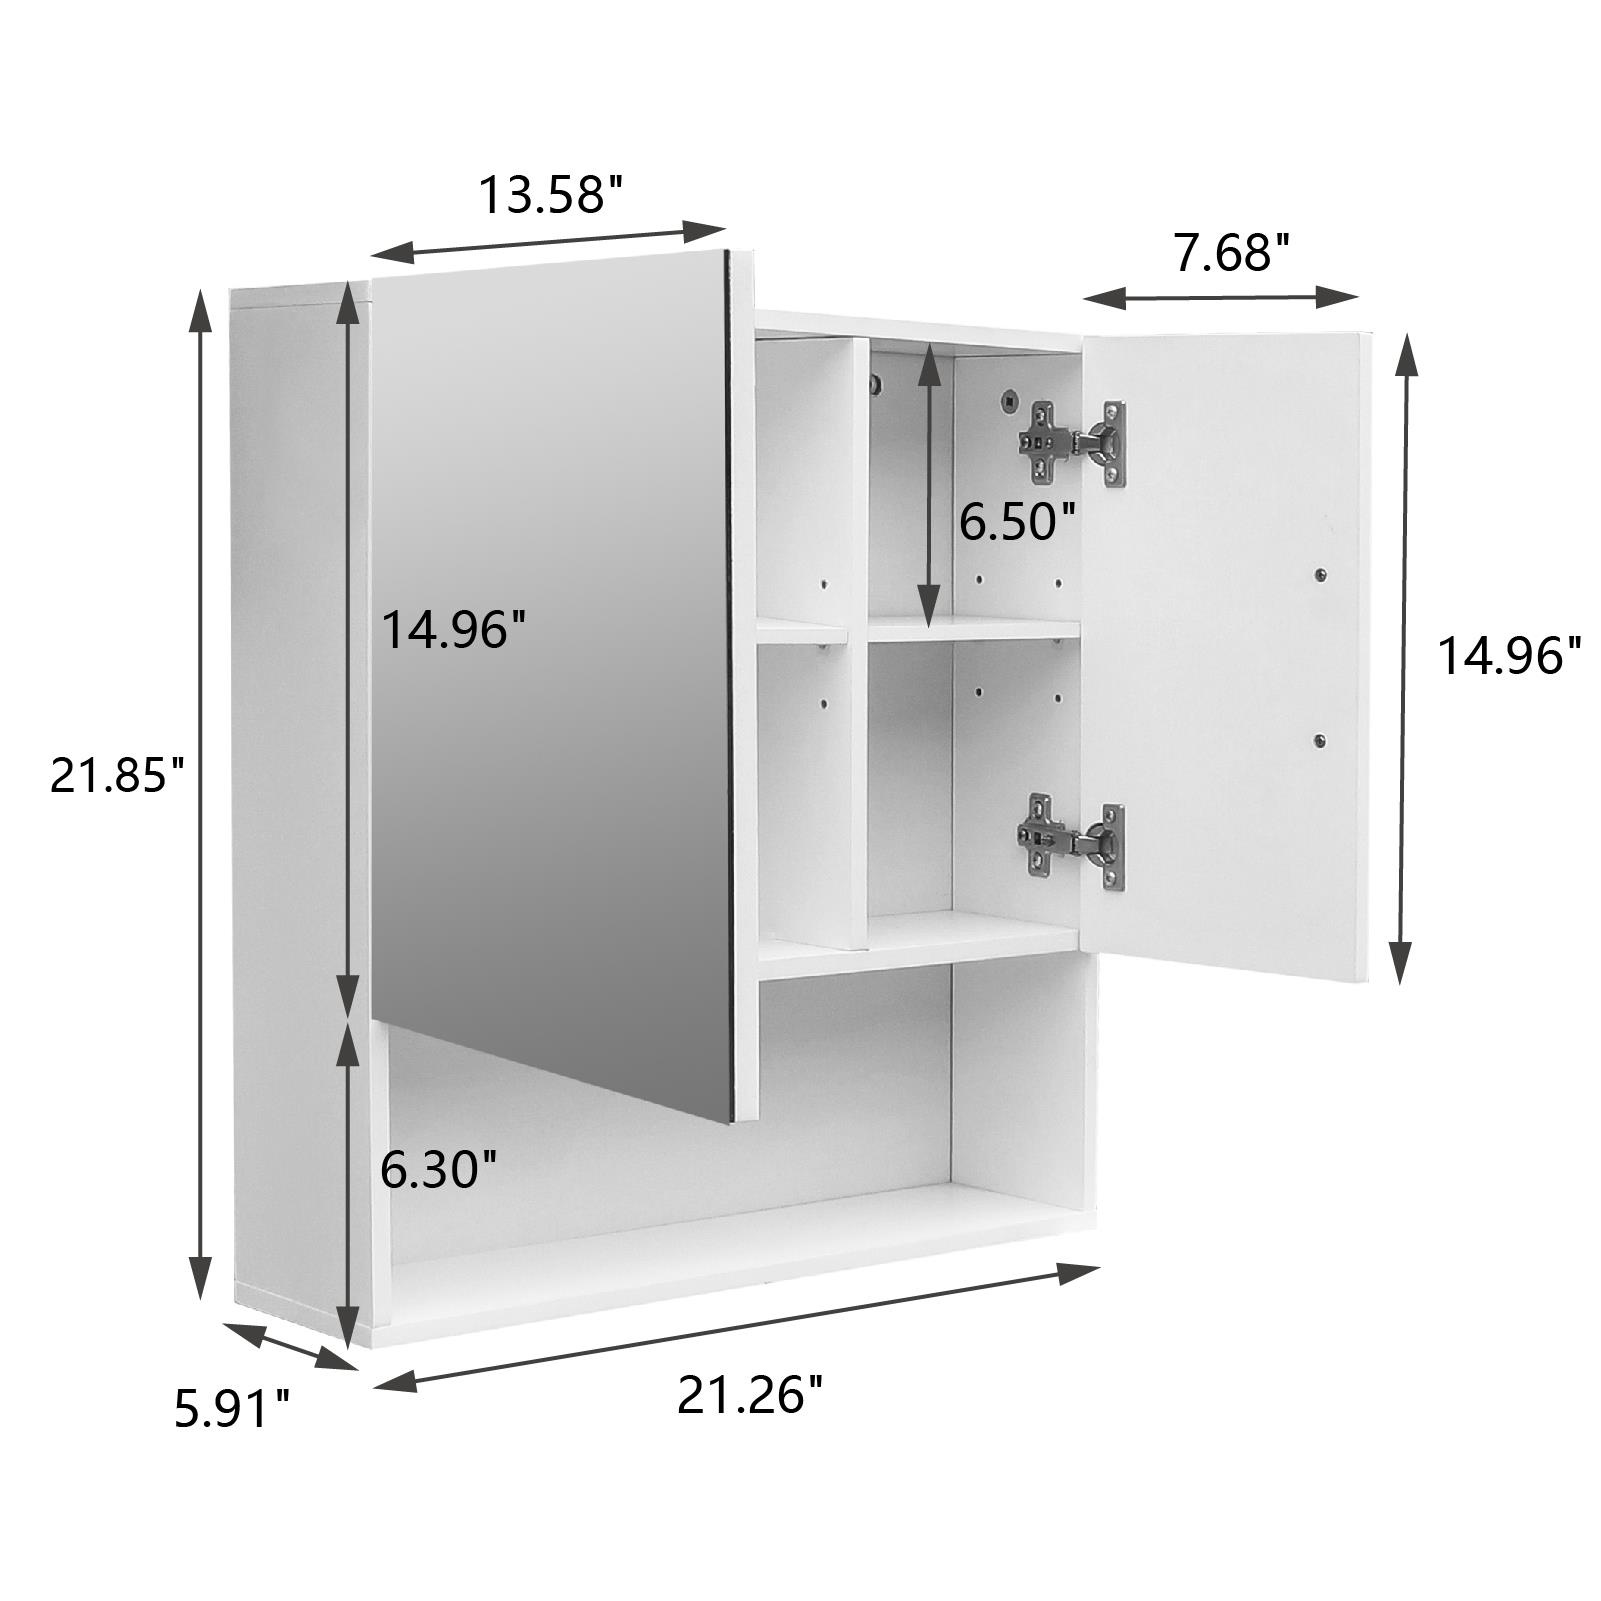 GoDecor Wall Storage Cabinet with mirror Doors and Shelf, Mirrored Wall Mounted Medicine Cabinet for Bathroom, White - image 2 of 5